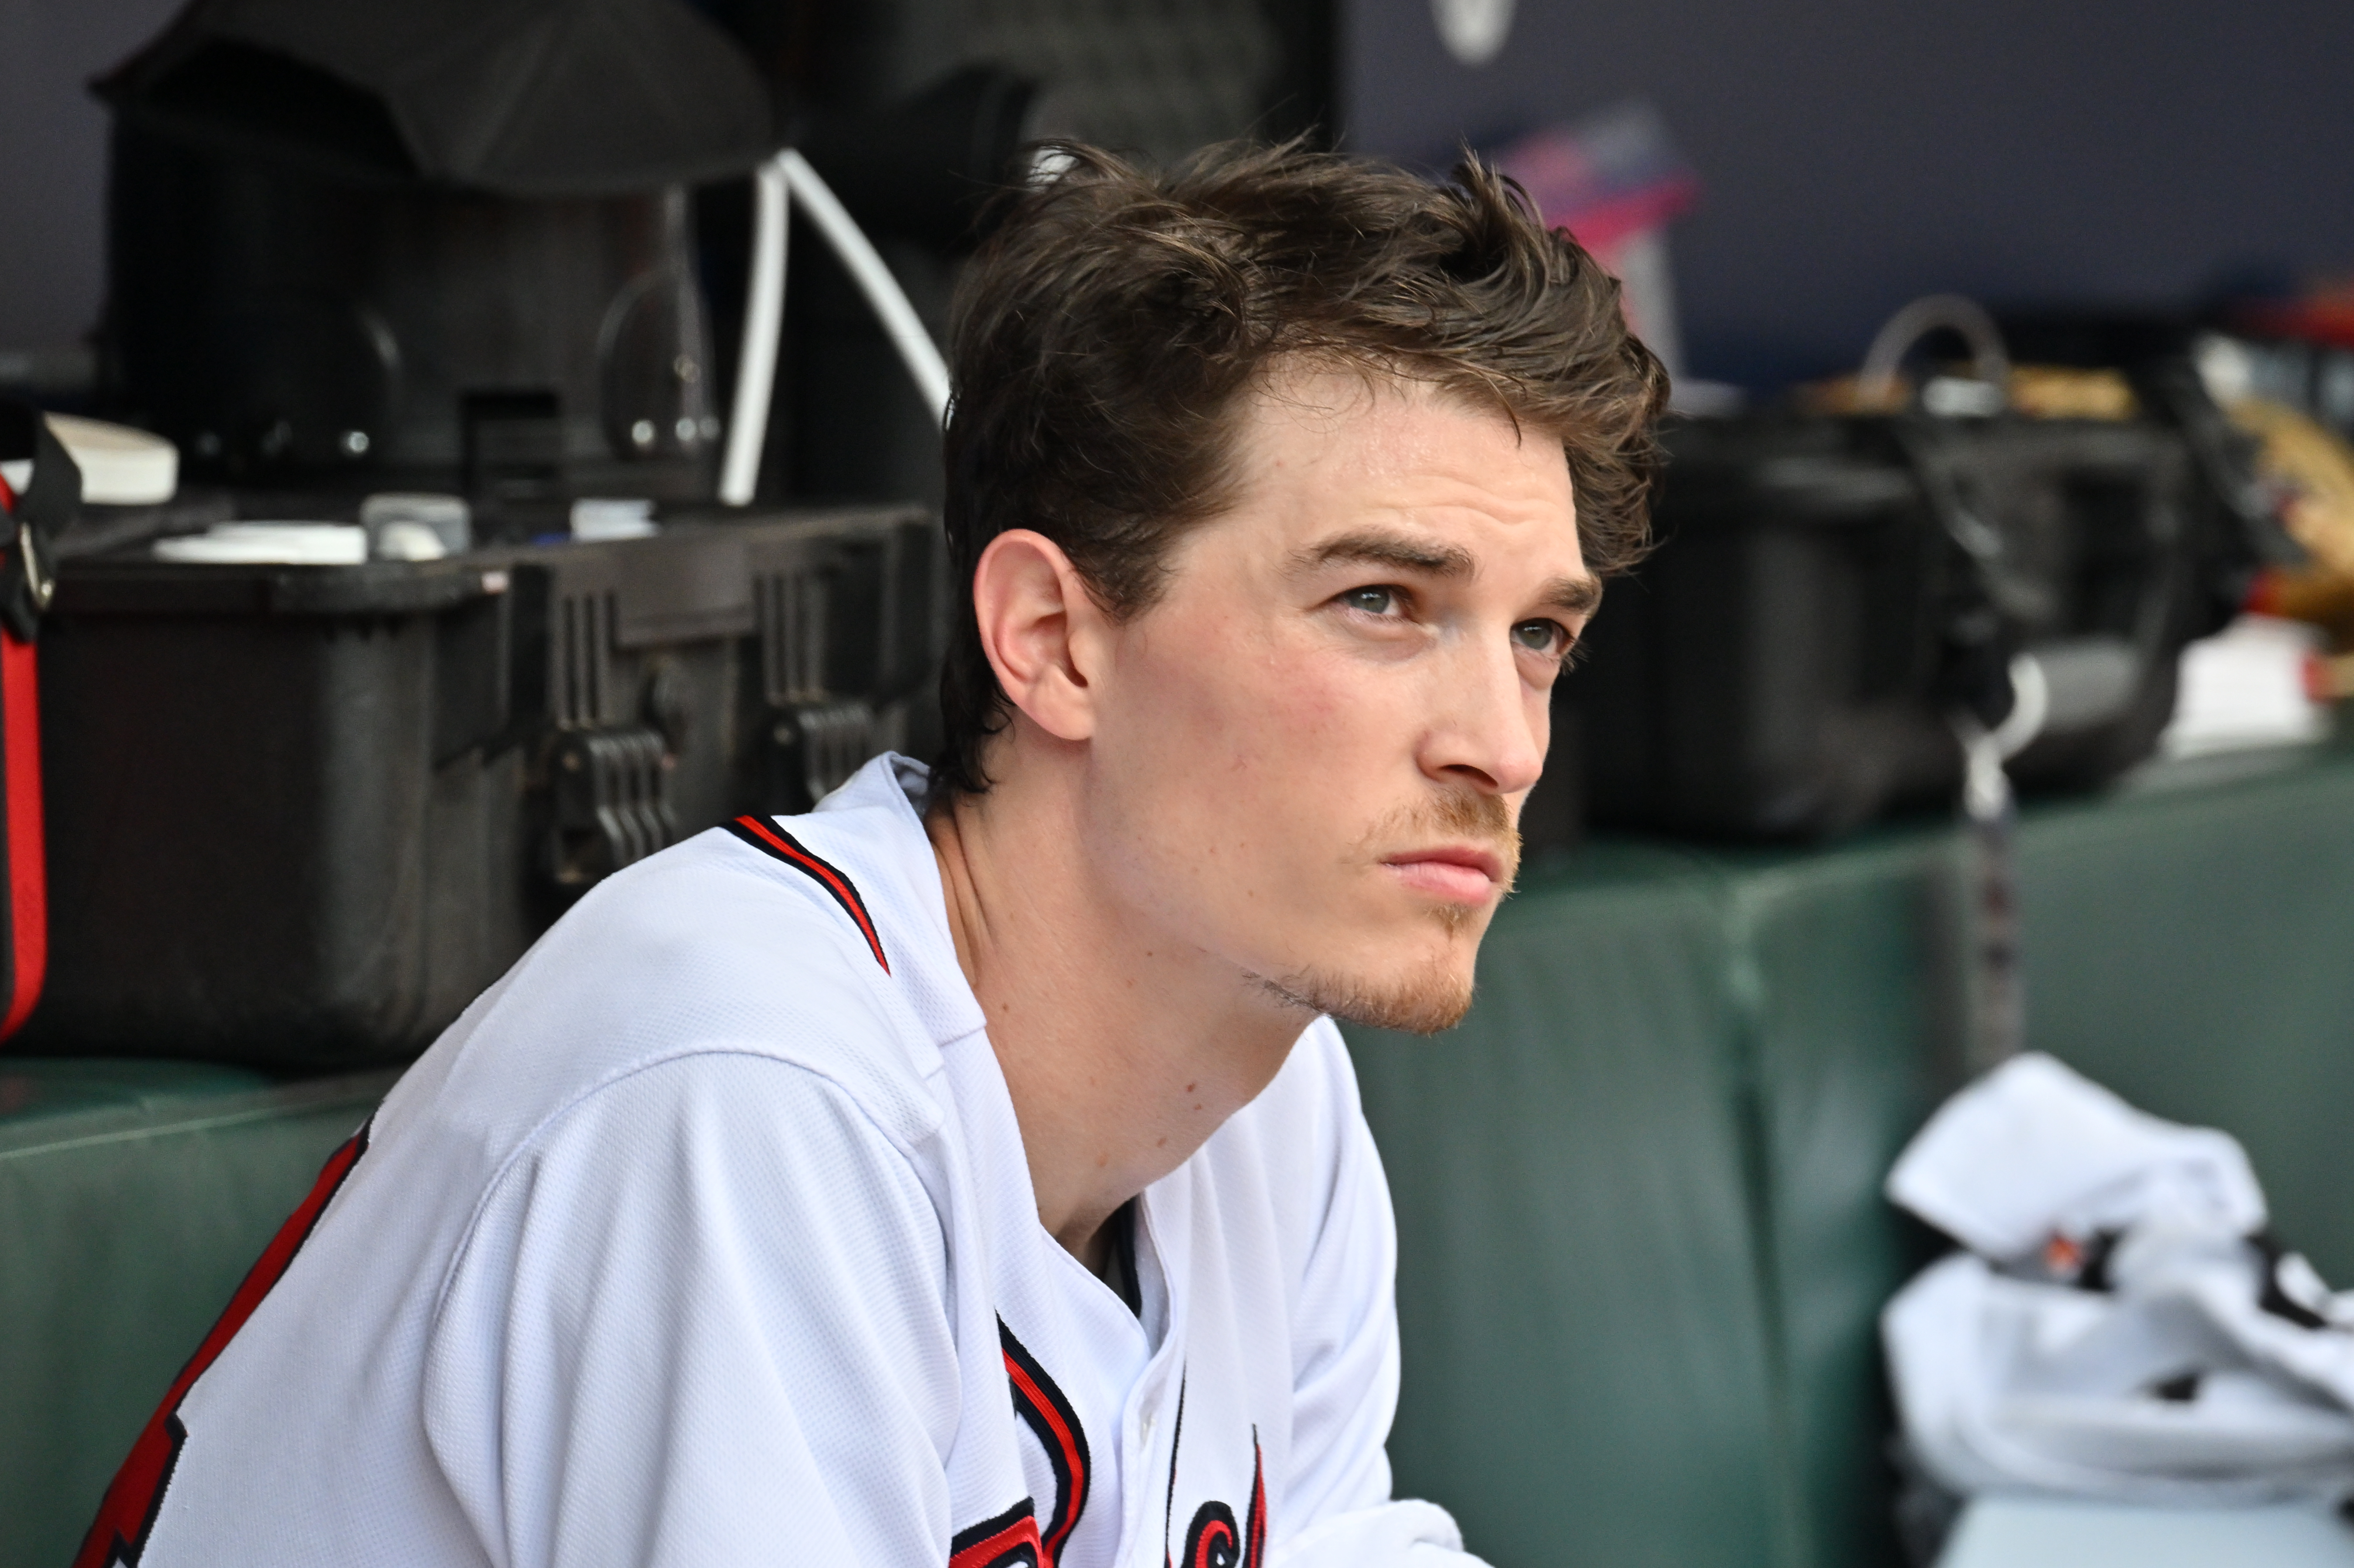 Braves' ace Max Fried heads to arbitration for second straight